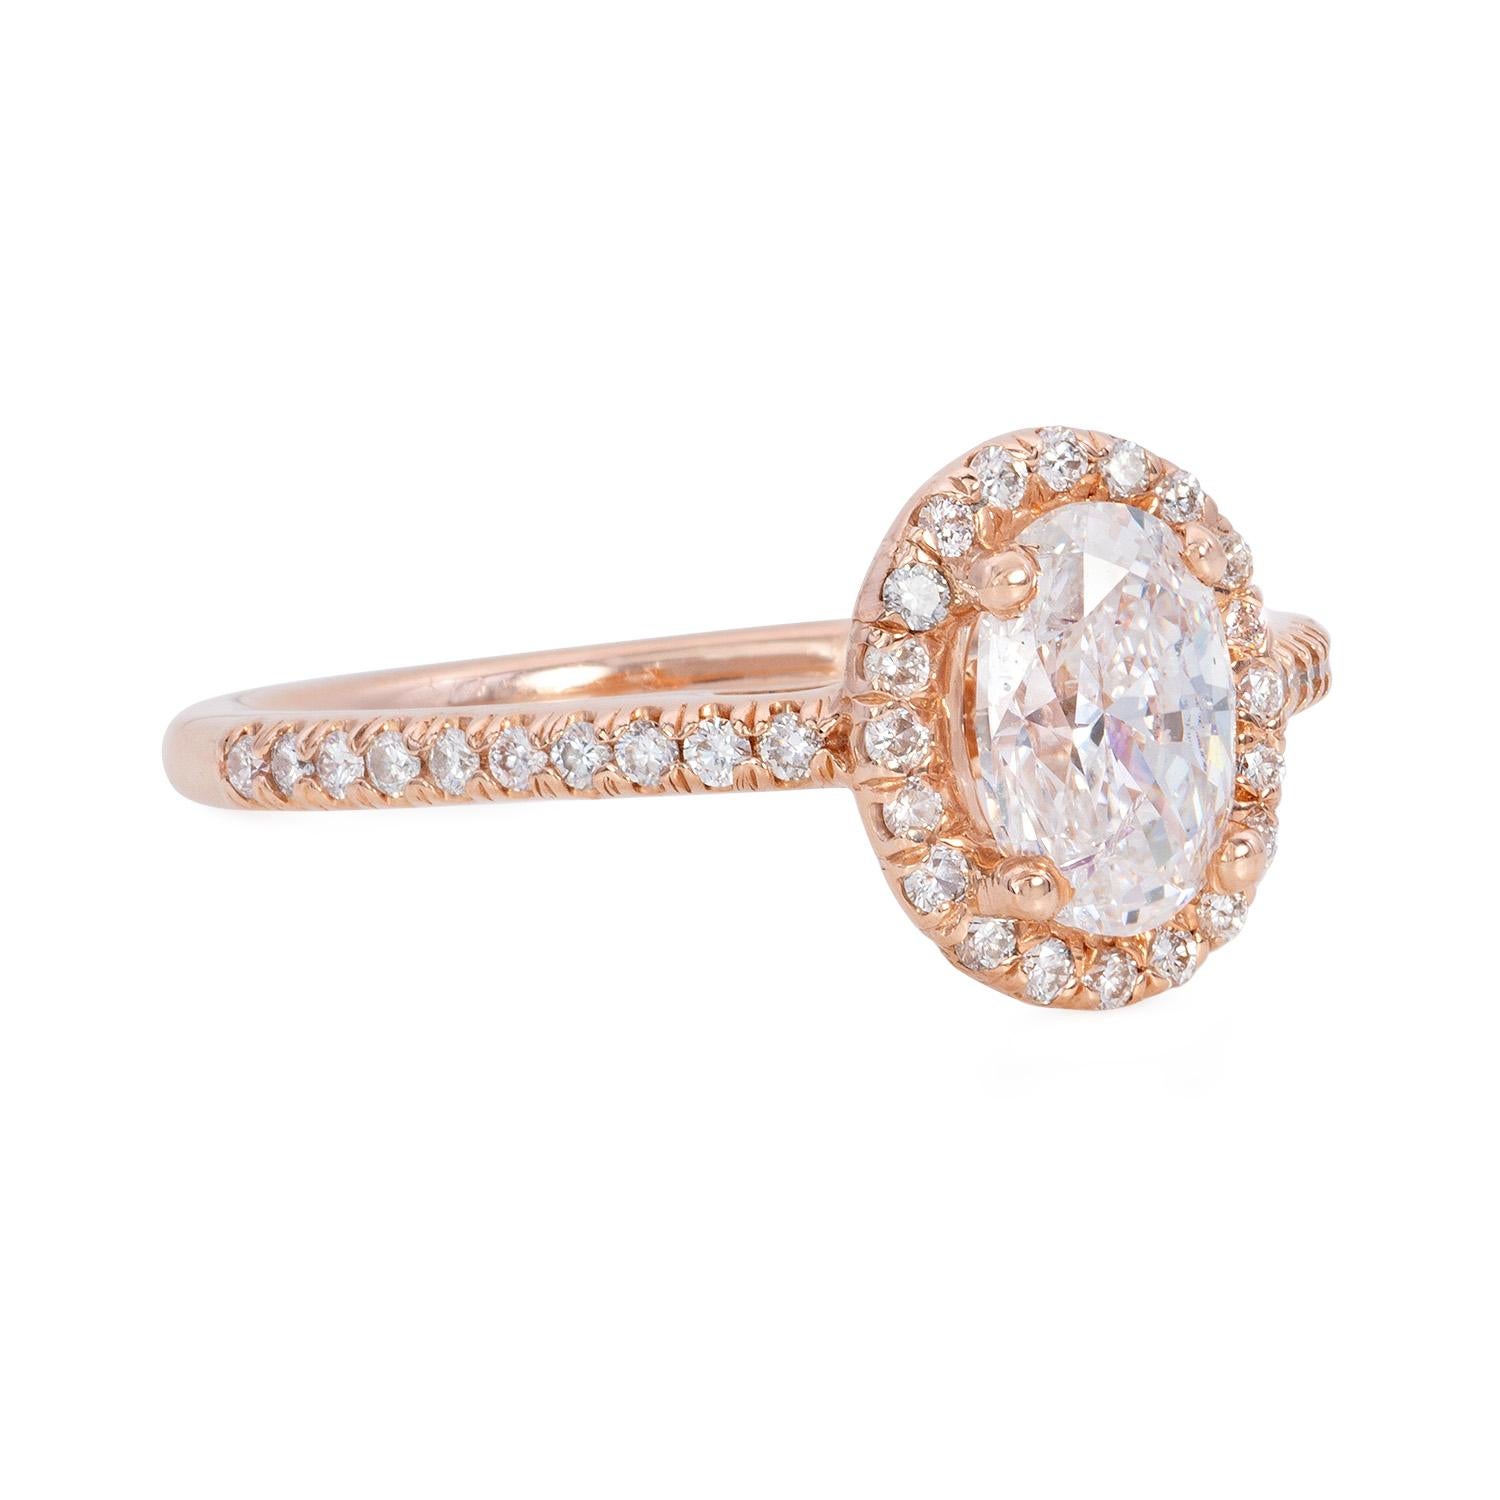 Introducing our elegant Diamond Oval Ring, a symbol of timeless beauty and sophistication, crafted with precision in lustrous 14K rose gold and featuring a stunning white diamond weighing 1.01 carats.



Product Features:



1. Exquisite Oval